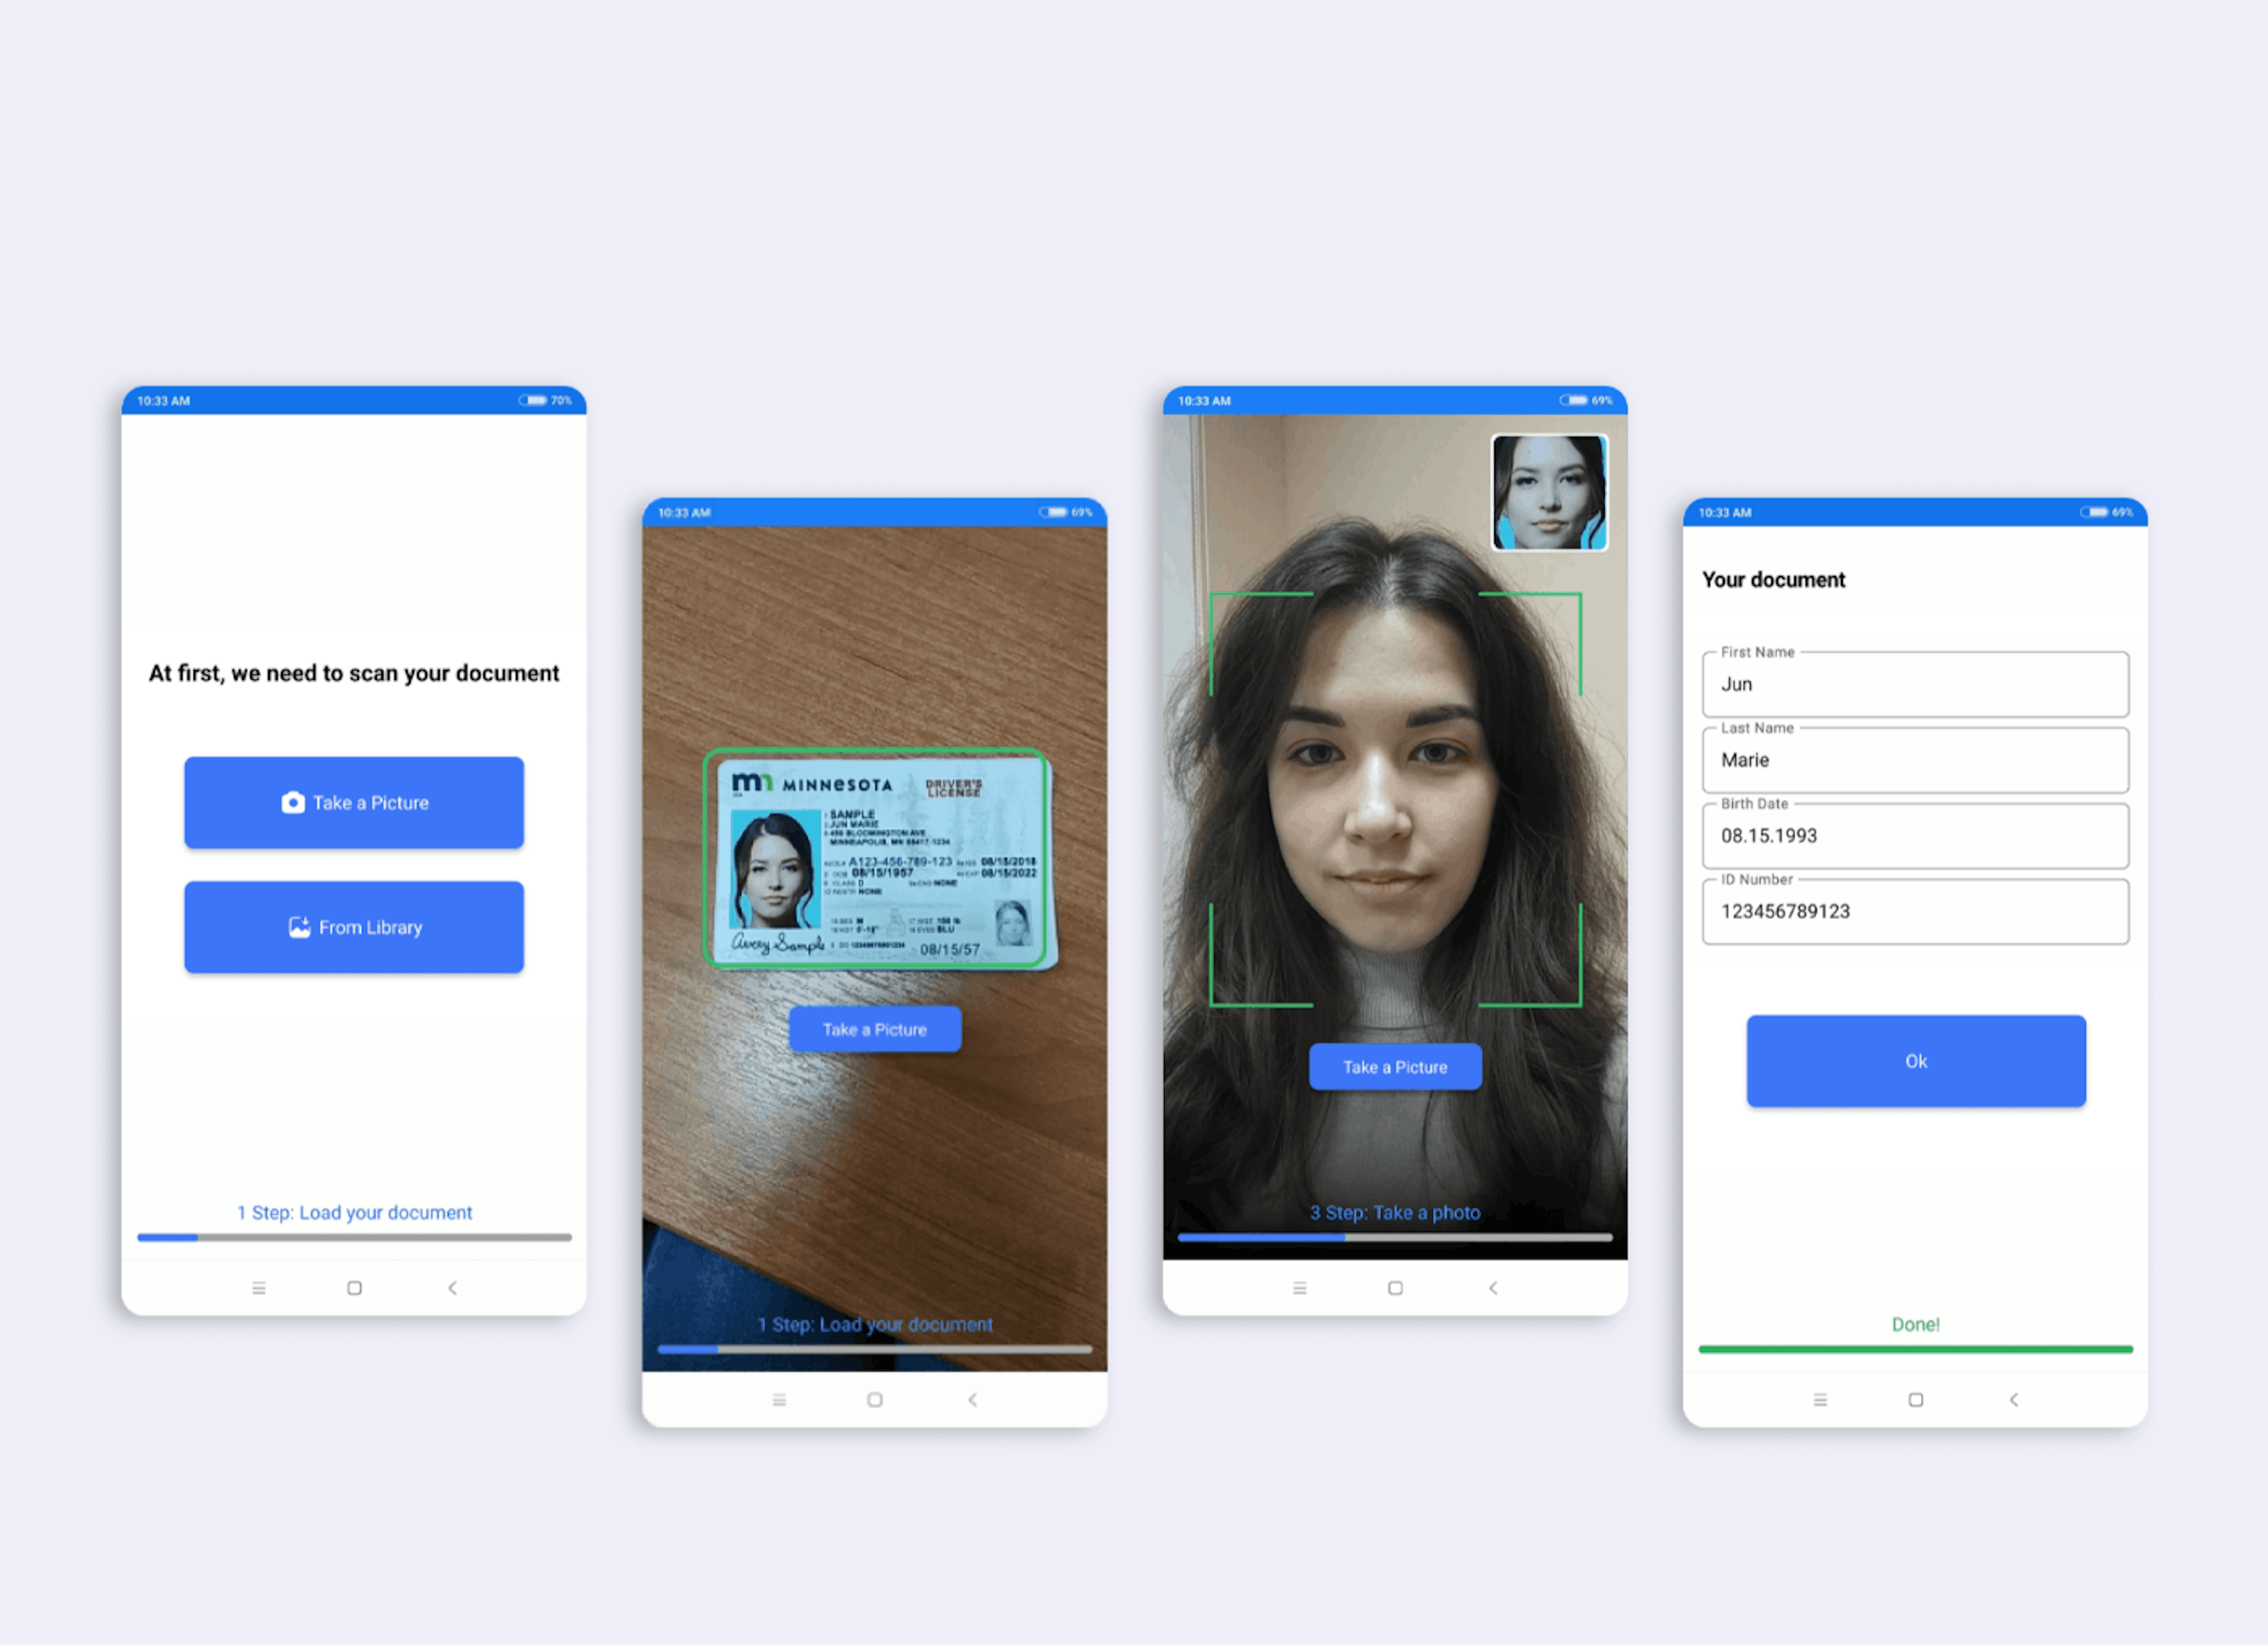 Example of a mobile KYC app with facial recognition and document detection